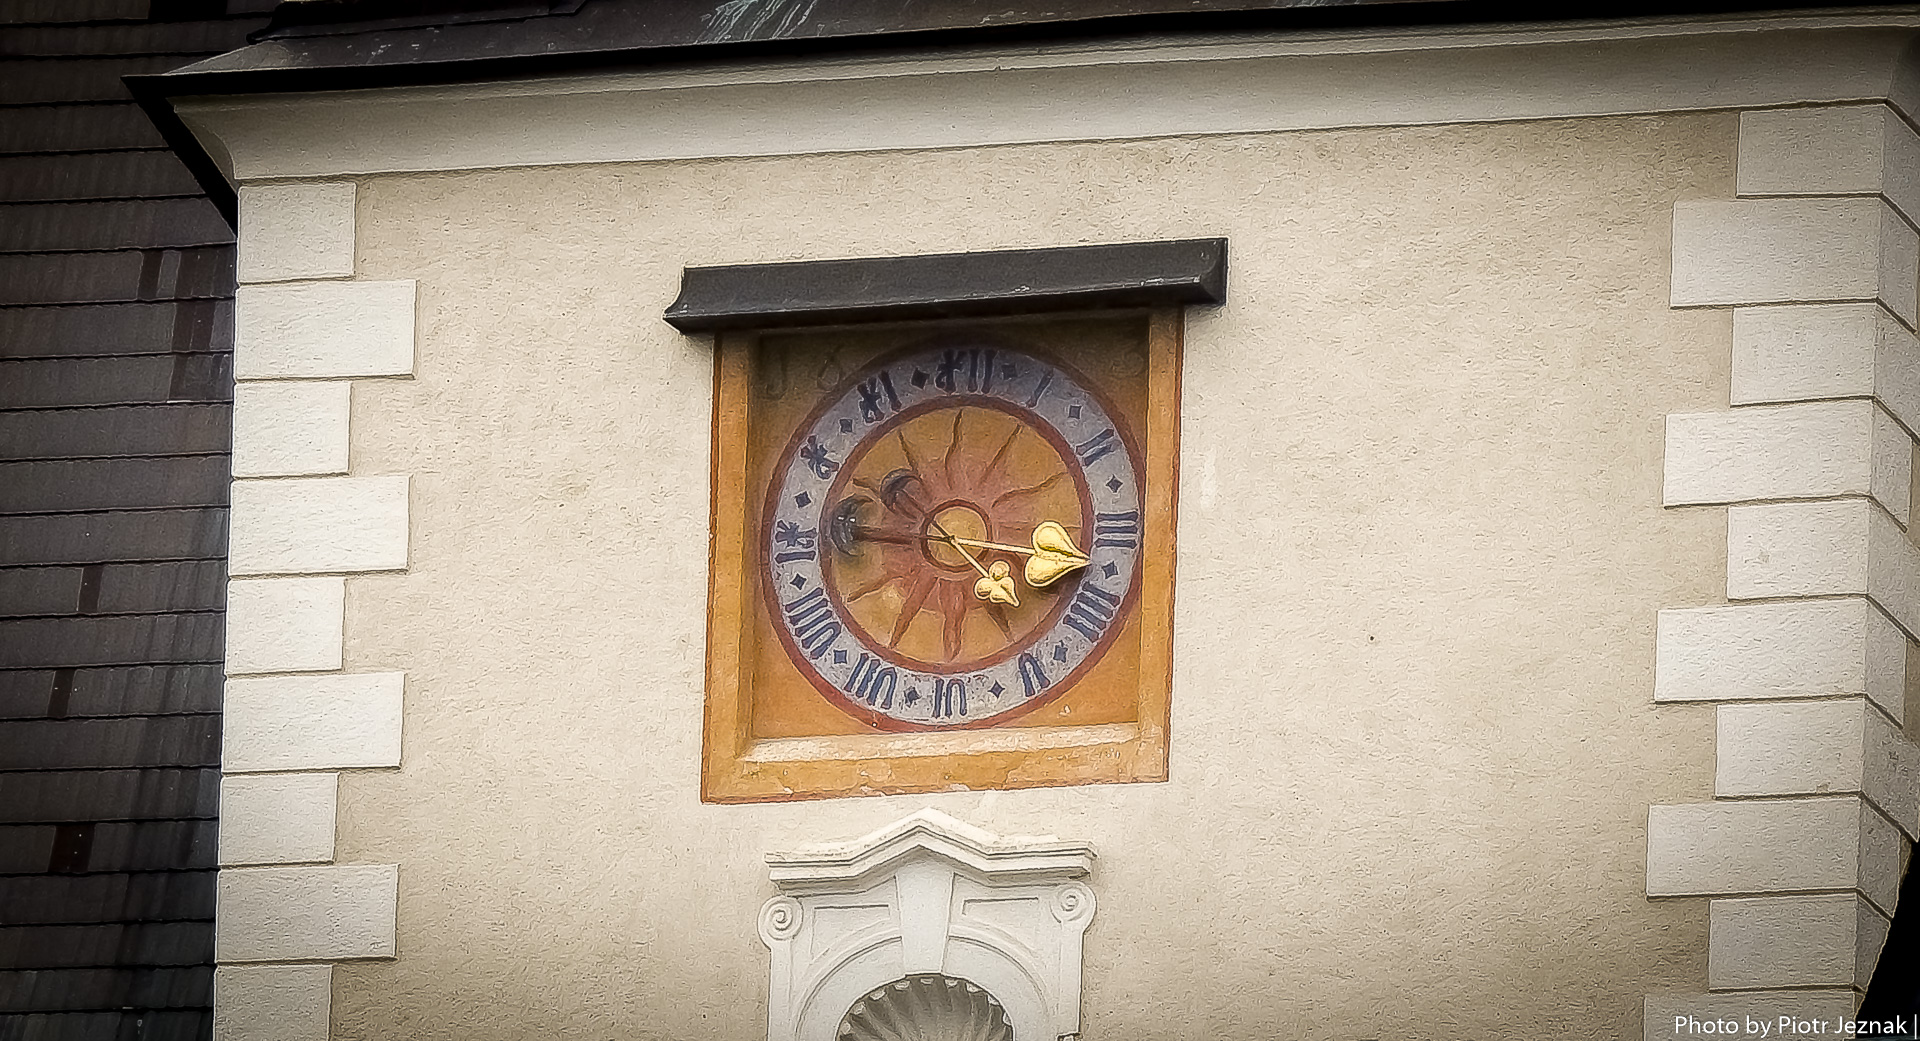 The tower clock of Forchtenstein Castle